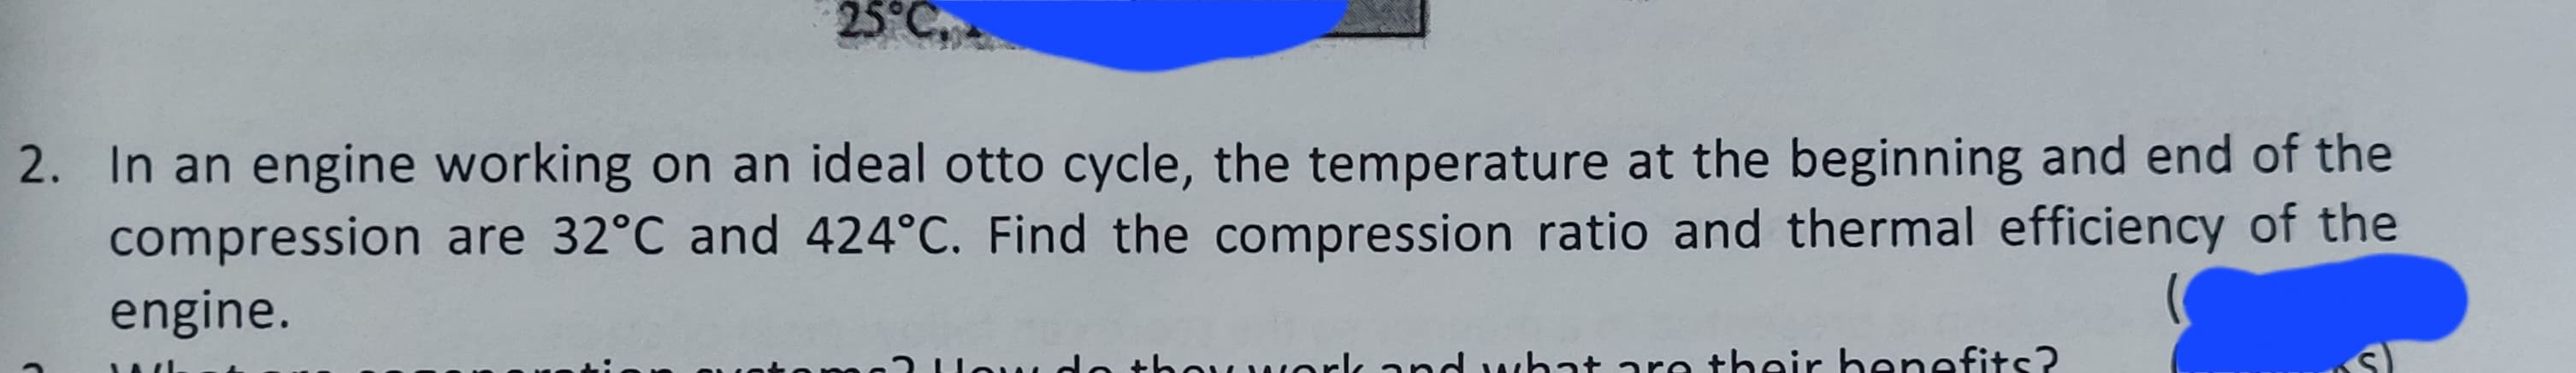 2. In an engine working on an ideal otto cycle, the temperature at the beginning and end of the
compression are 32°C and 424°C. Find the compression ratio and thermal efficiency of the
engine.
Jou d
w work and what are their benefits?